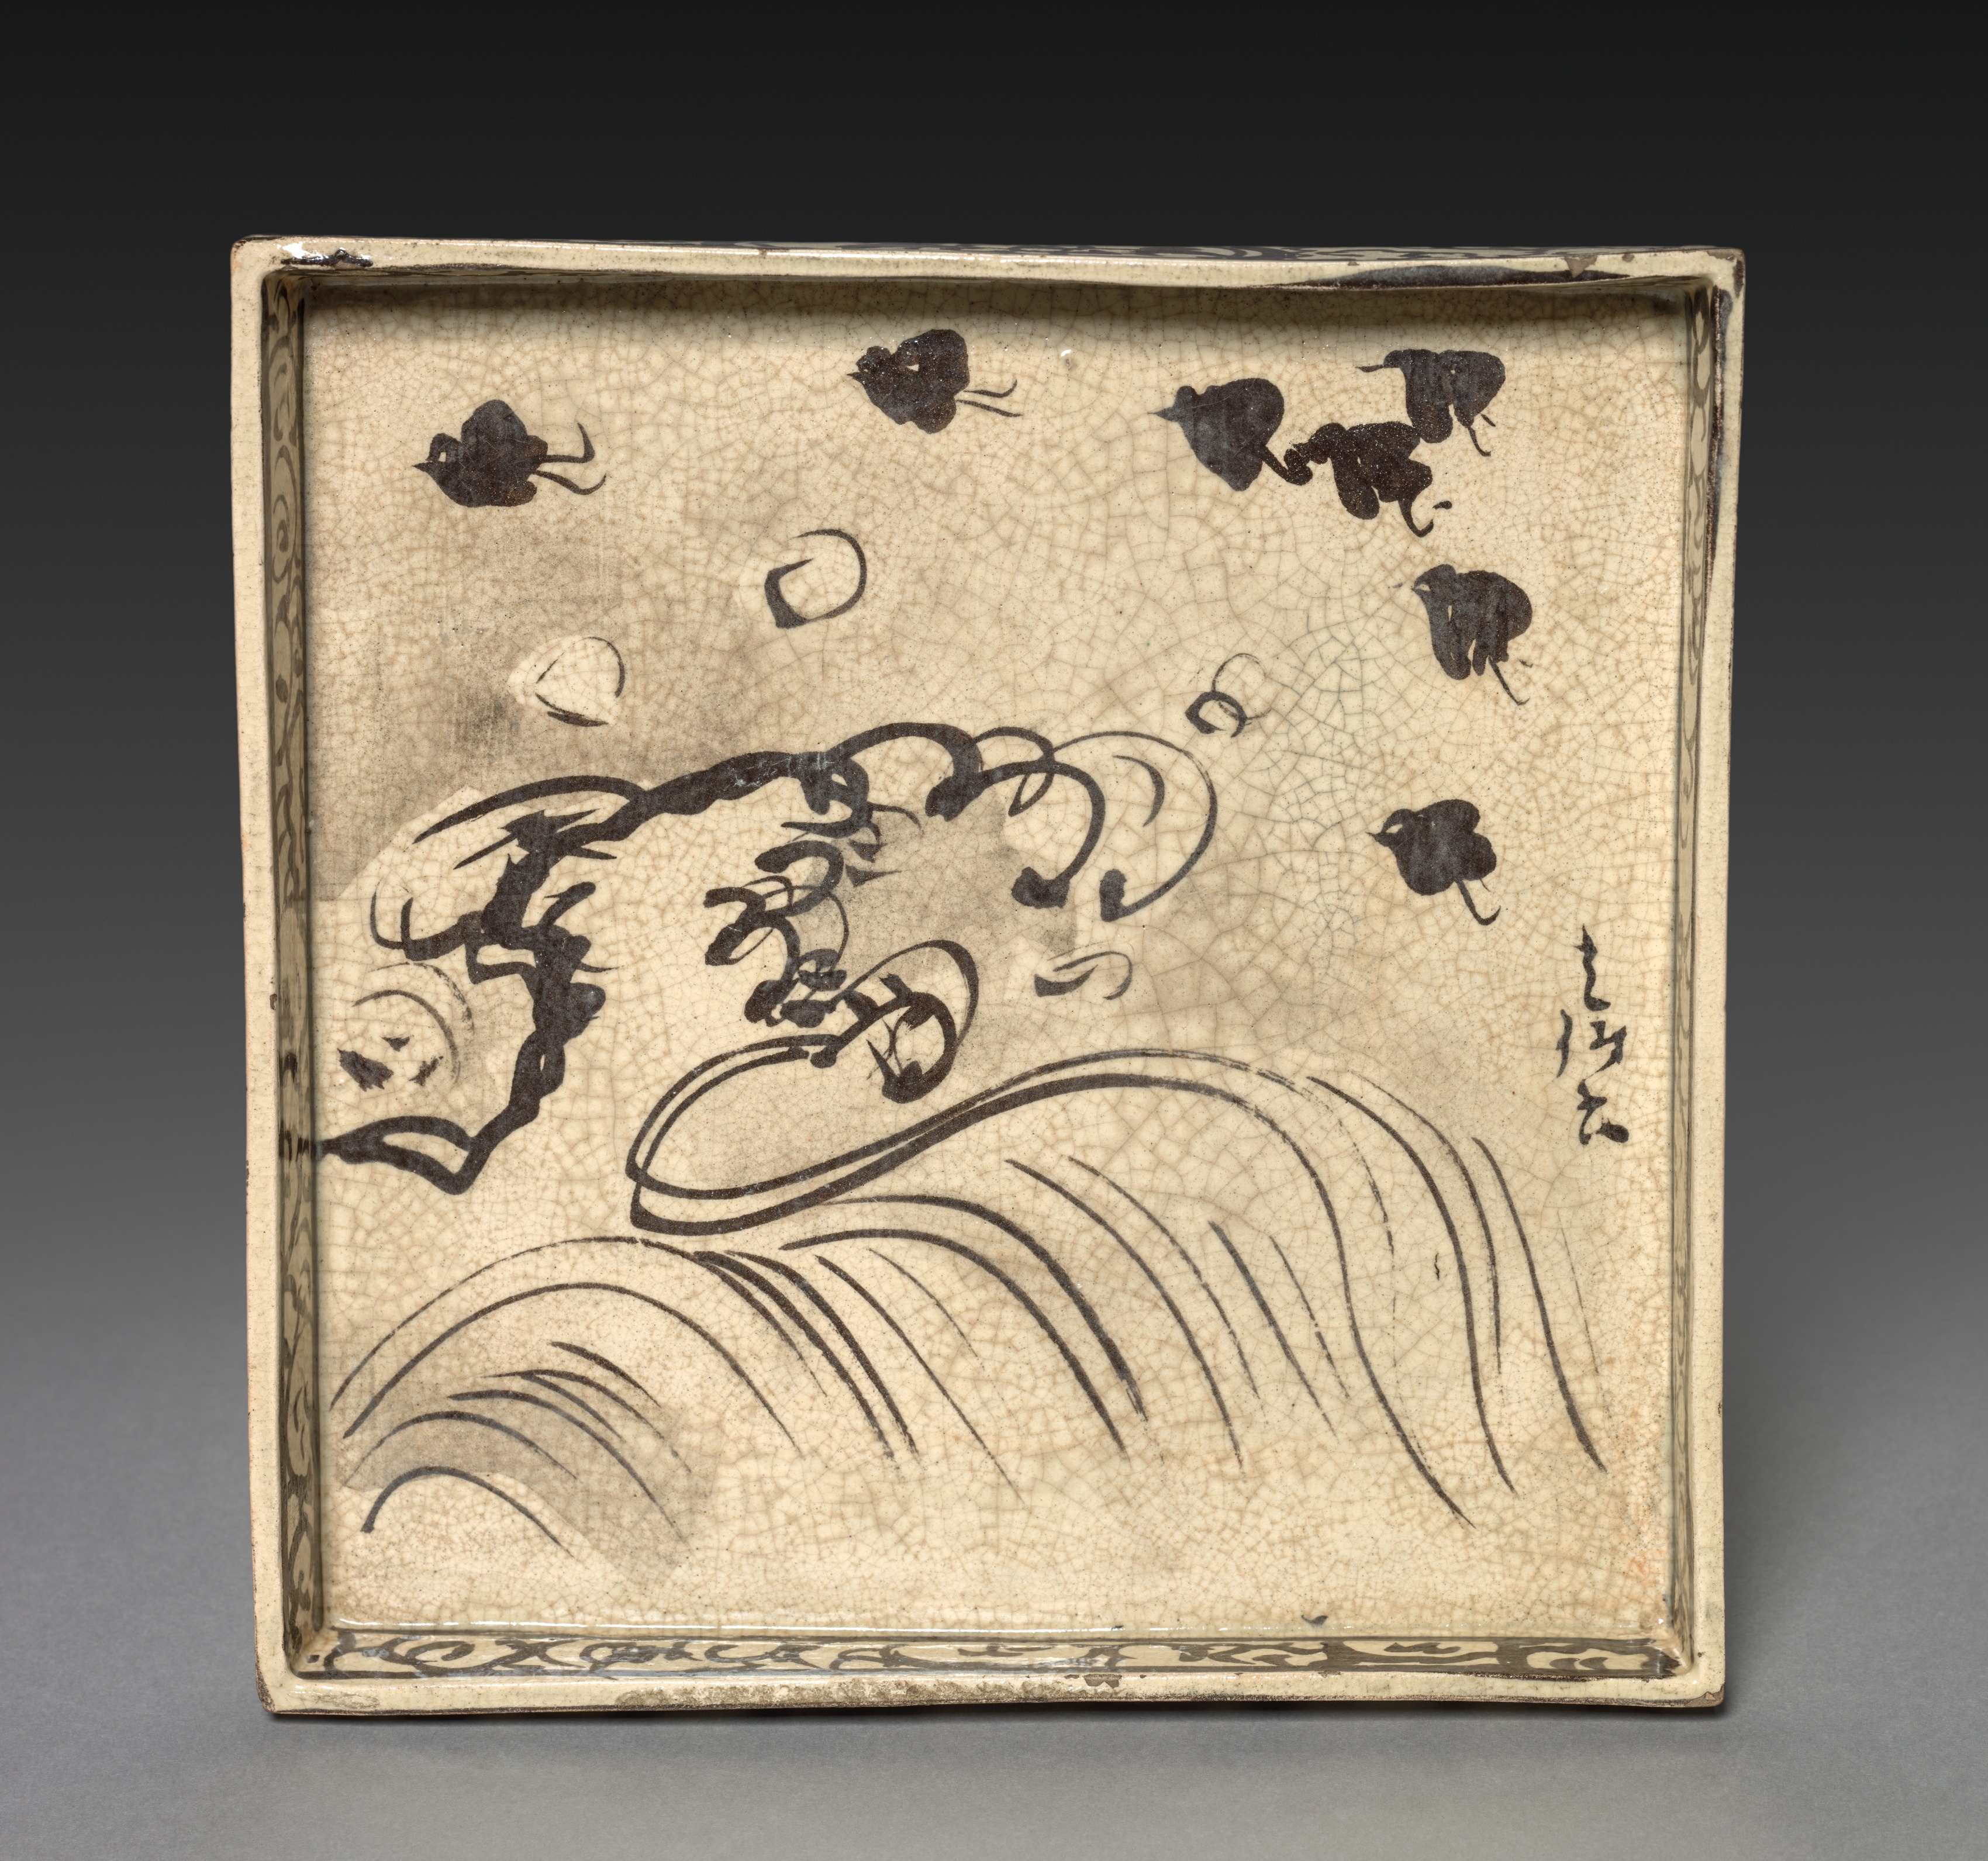 Square Dish with Design of Plovers over Waves | Cleveland Museum 